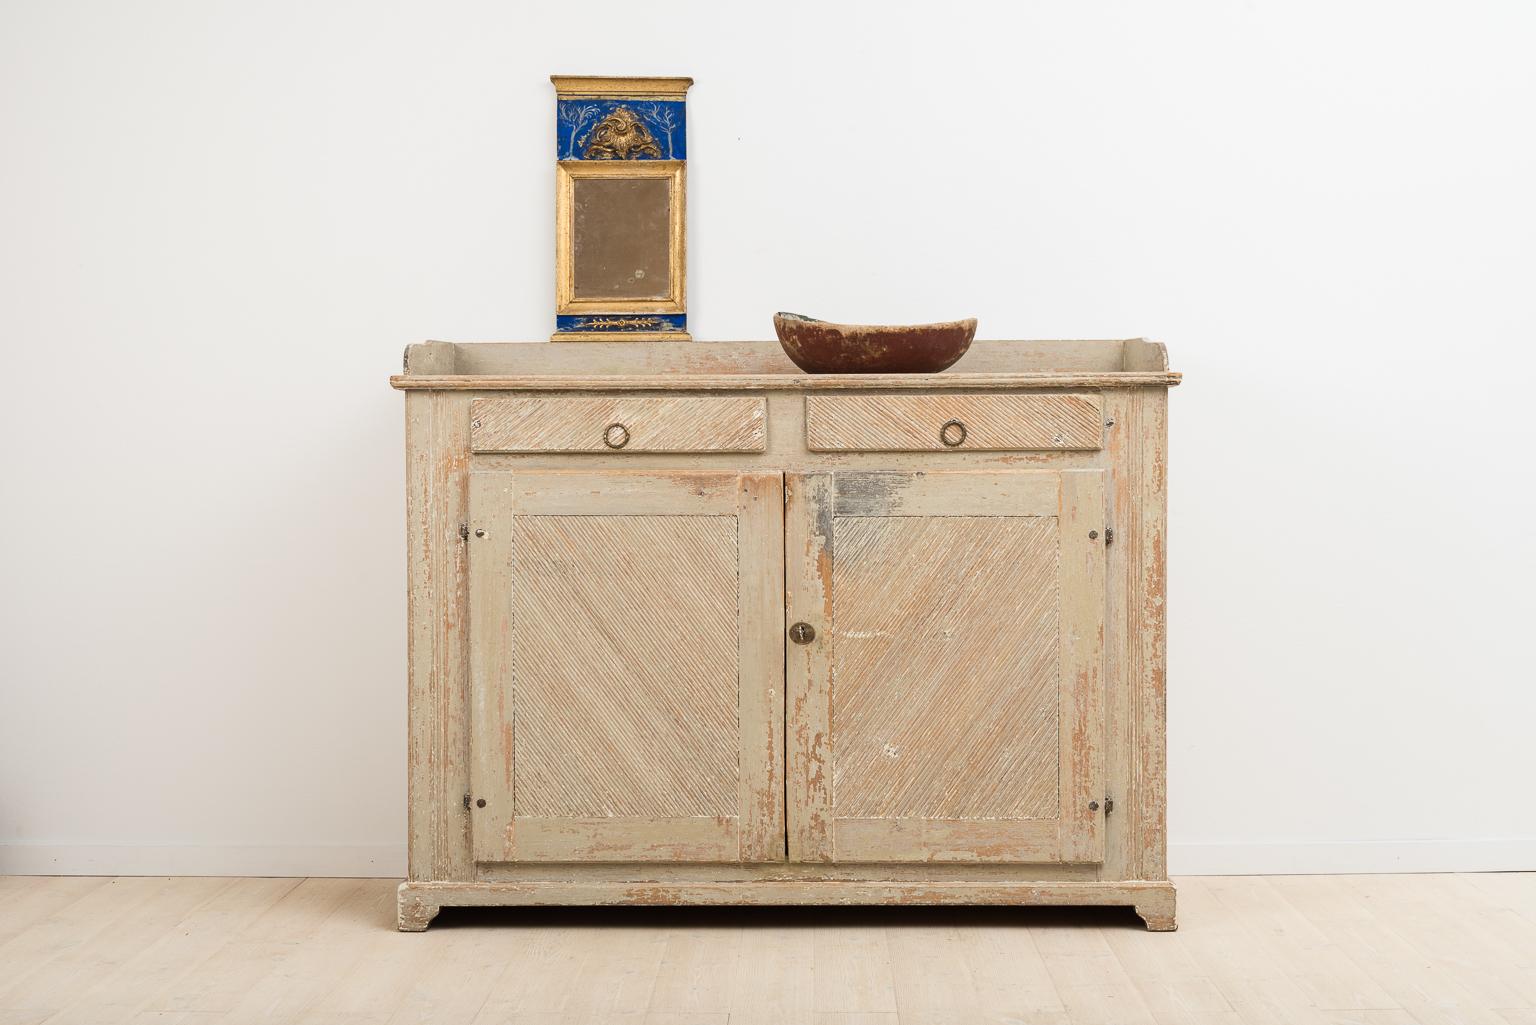 Gustavian sideboard from northern Sweden that’s been dry scraped to original paint. Originates from an old farmhouse located in a small village called Stöde in northern Sweden. It is rare to find sideboards this long and low. Working lock and key,